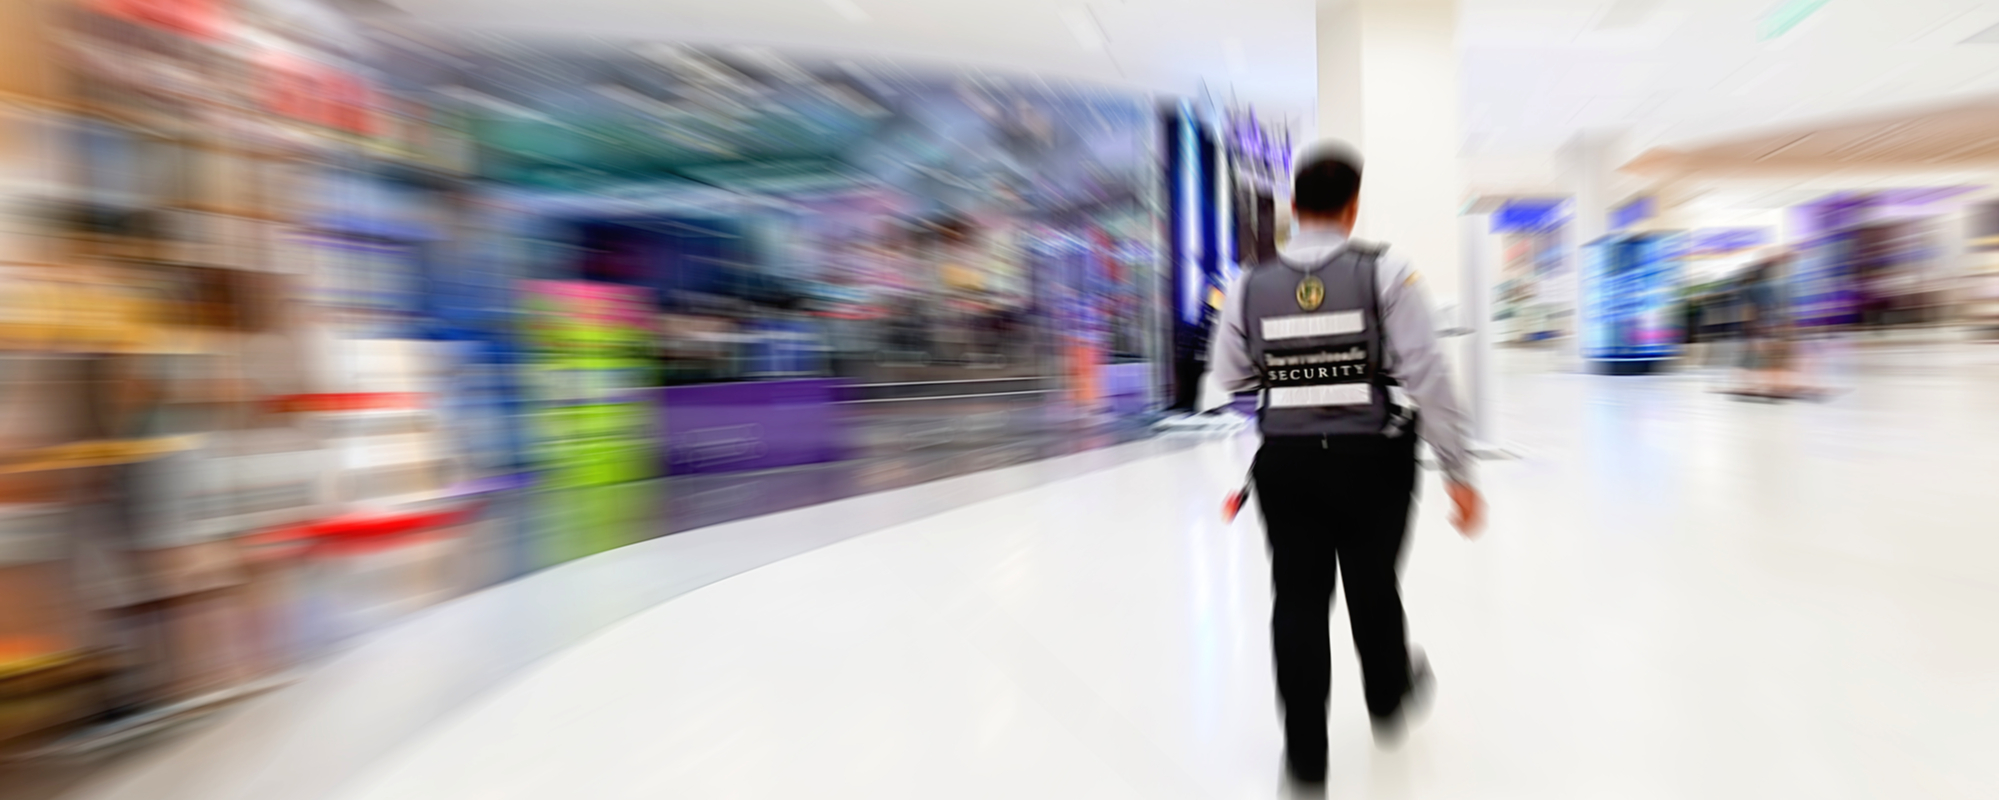 Motion blur image of the security guard in the mall